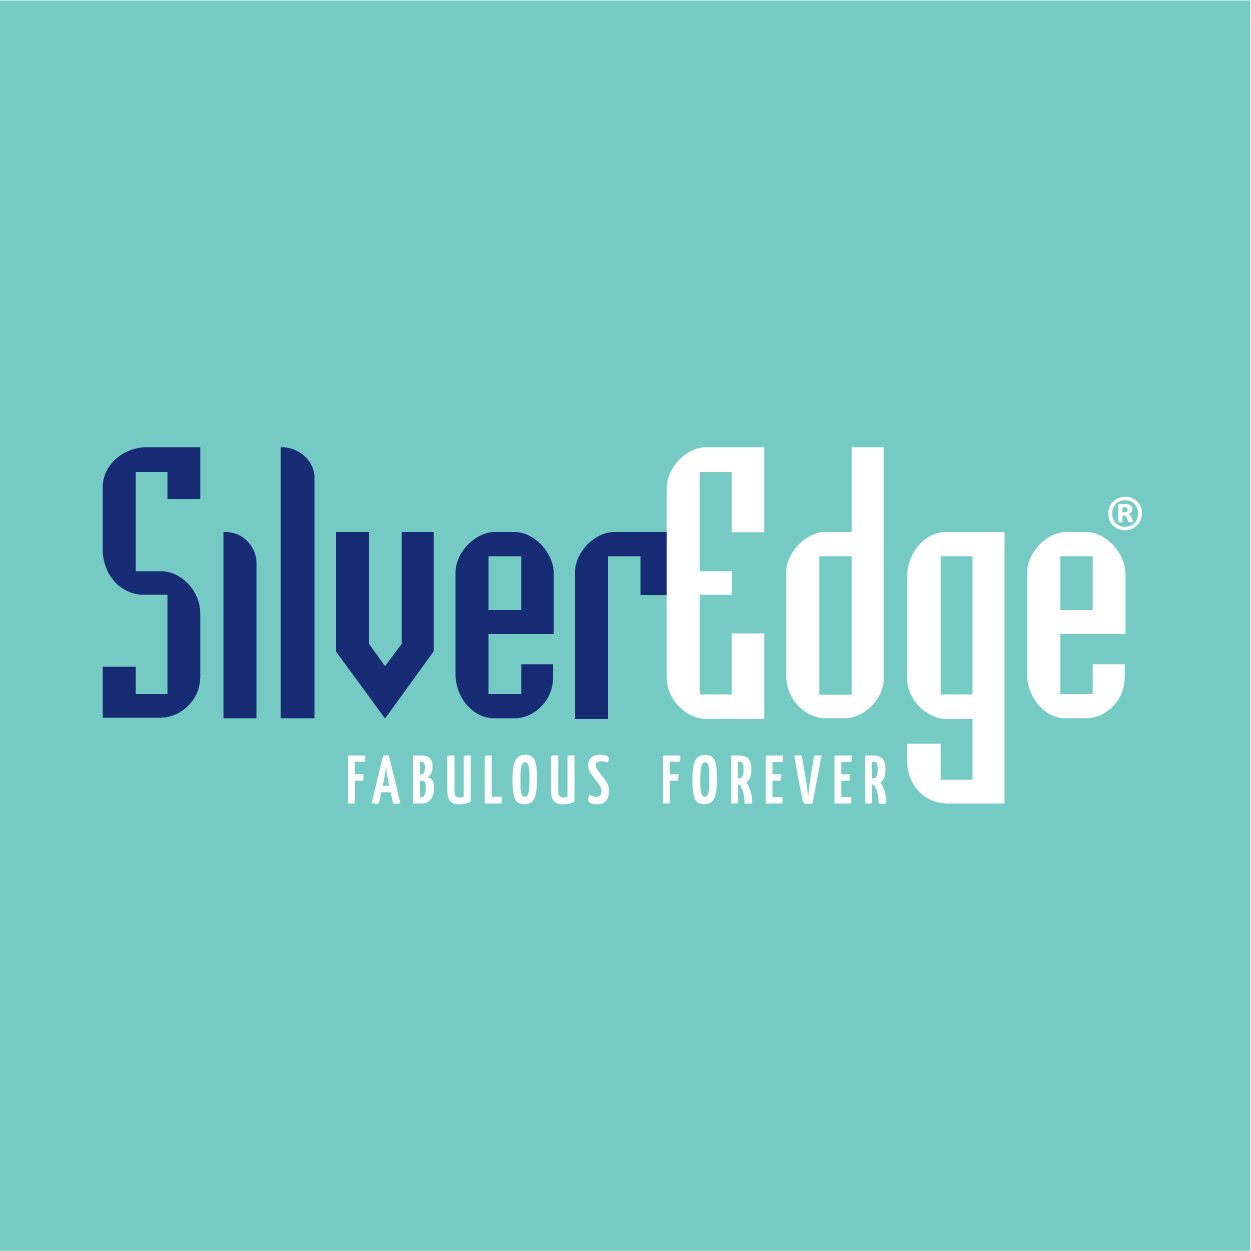 SilverEdge, envisions bringing in Rs 25 million through the direct-to-consumer sector